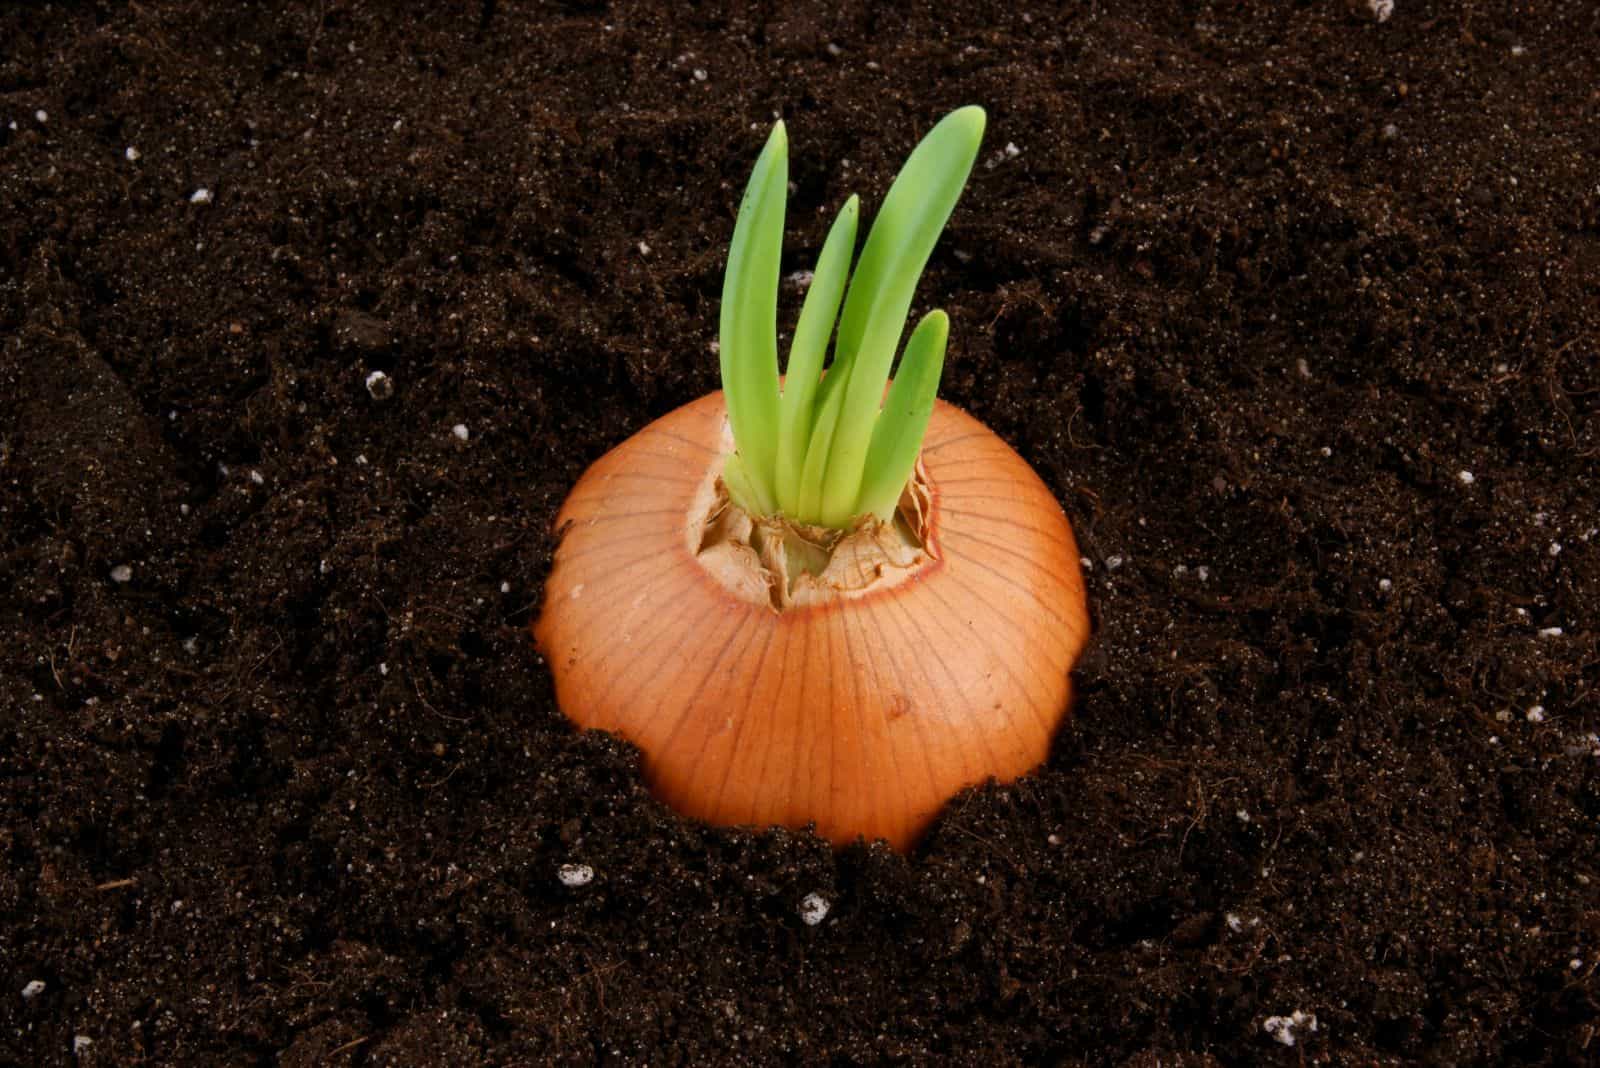 Growing onion bulb with fresh green sprouts in soil